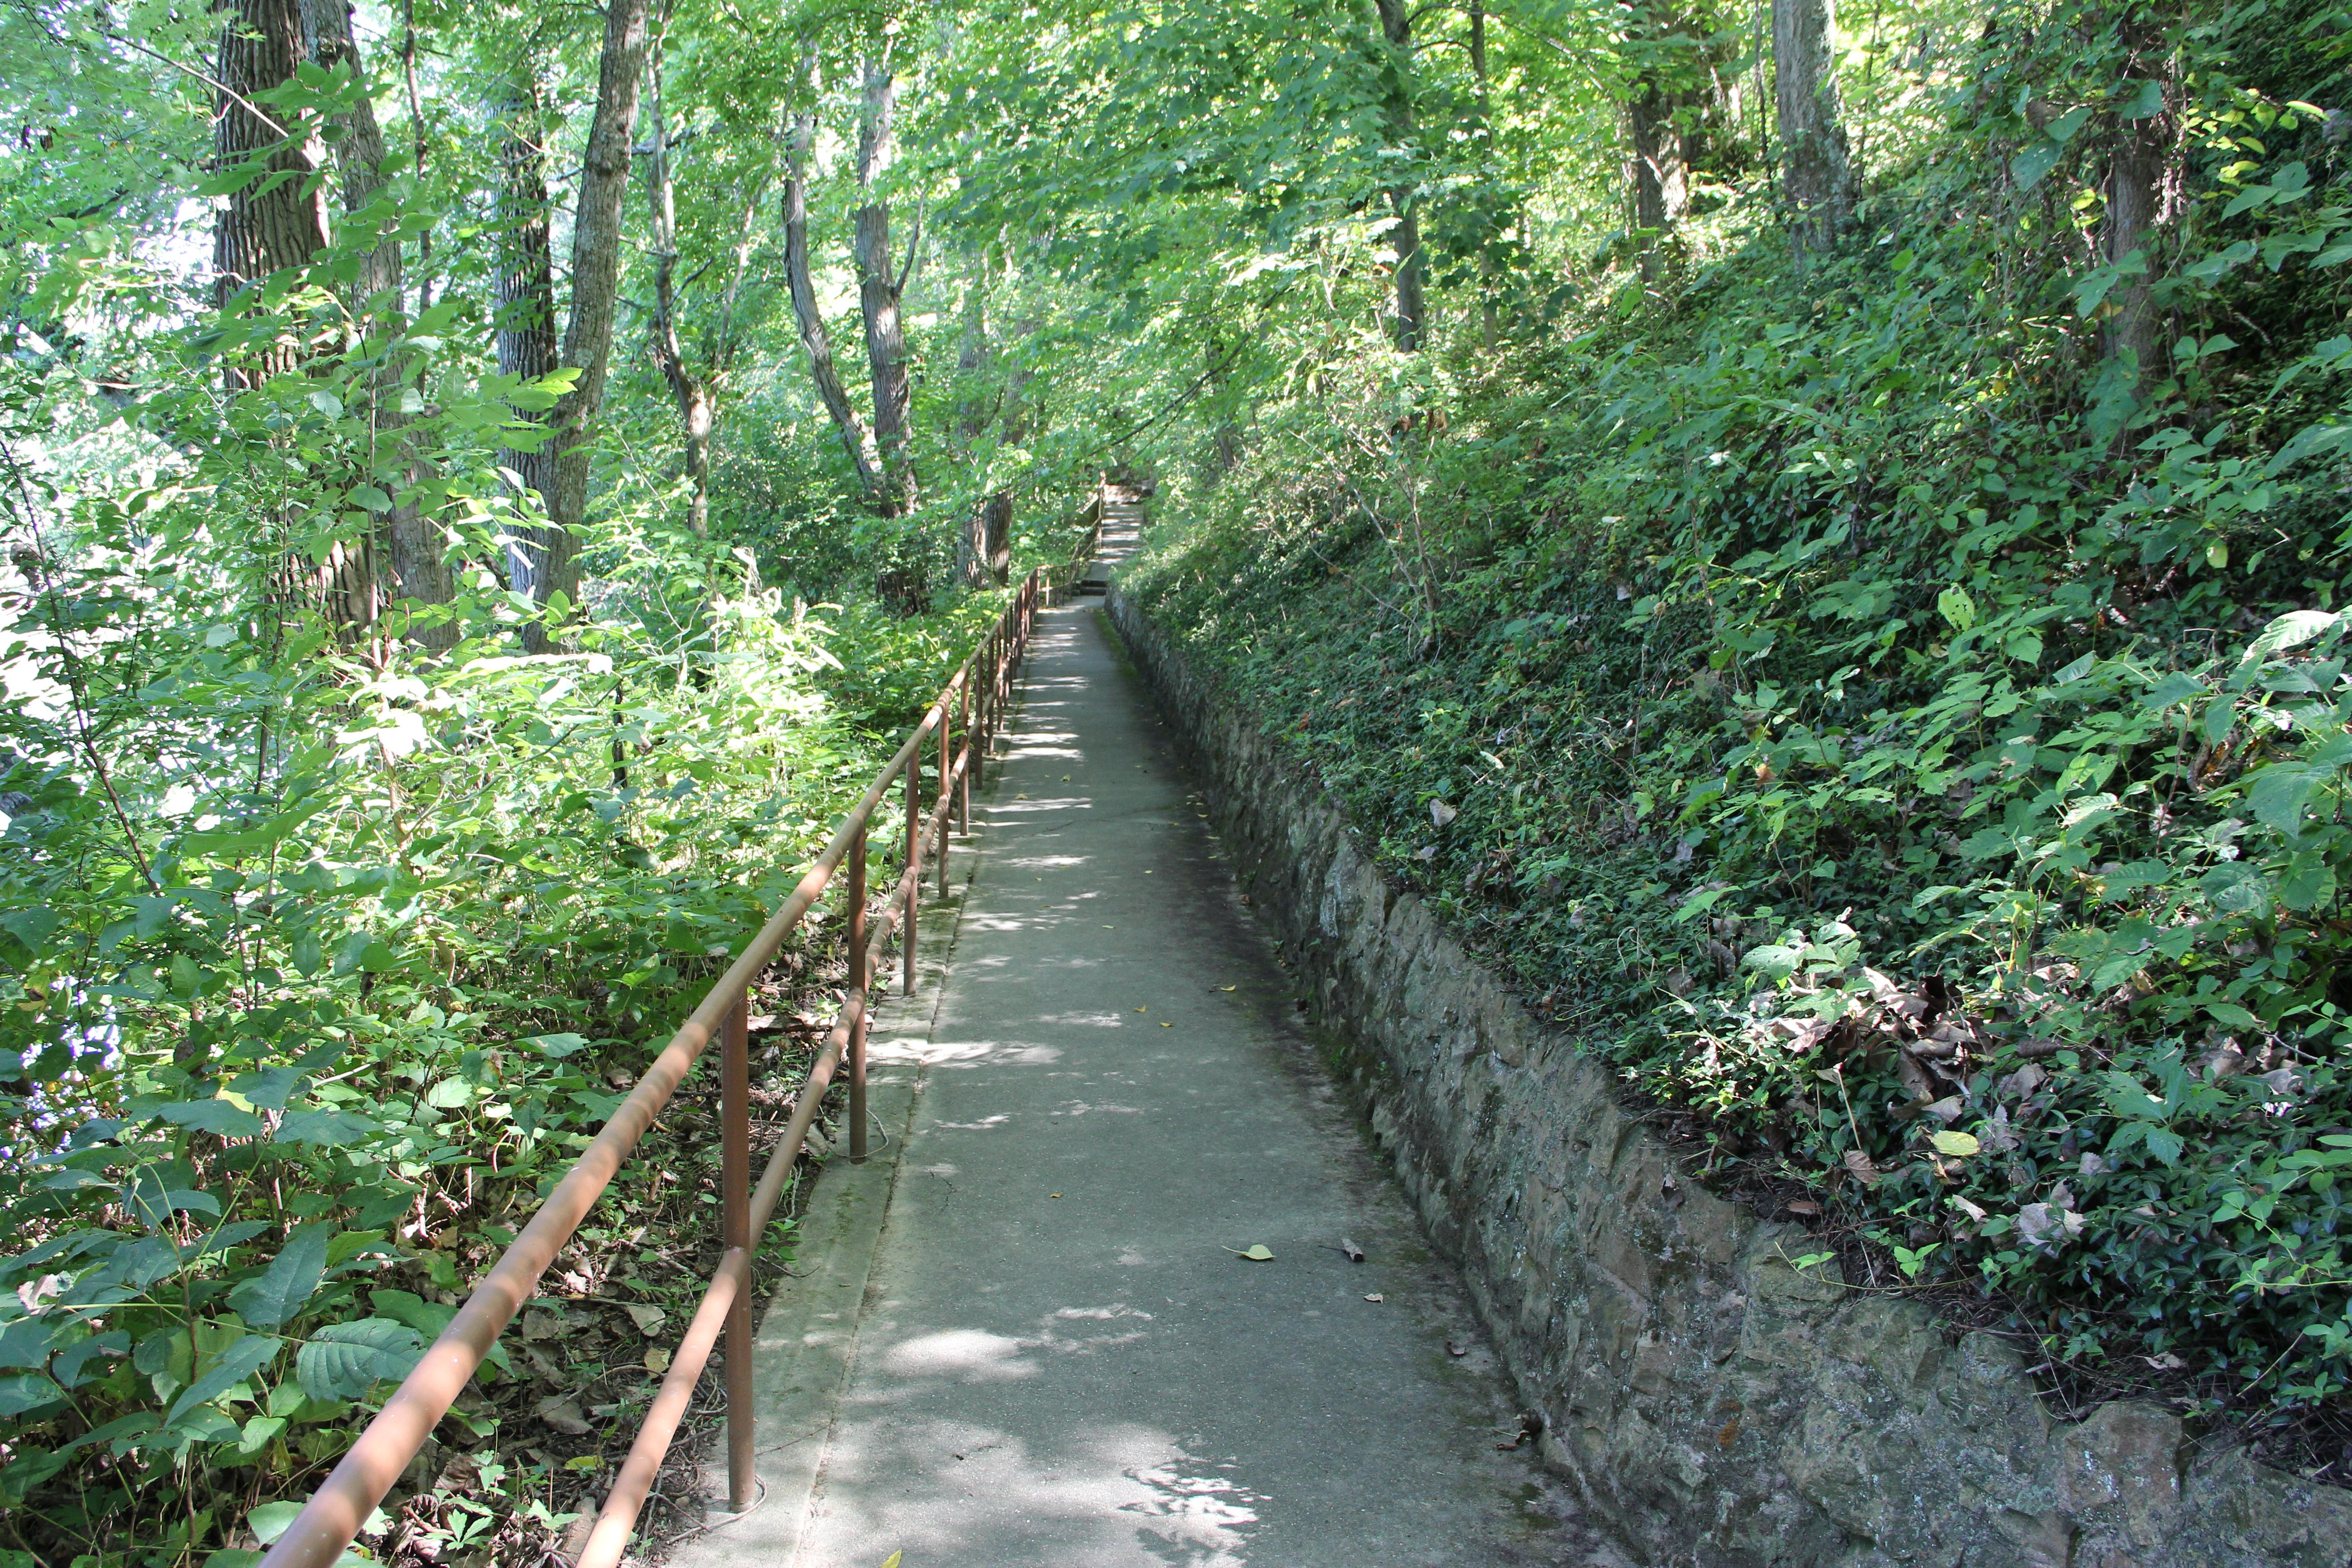 An asphalt path with a steel handrail on the left with green vegetative slope to the right.